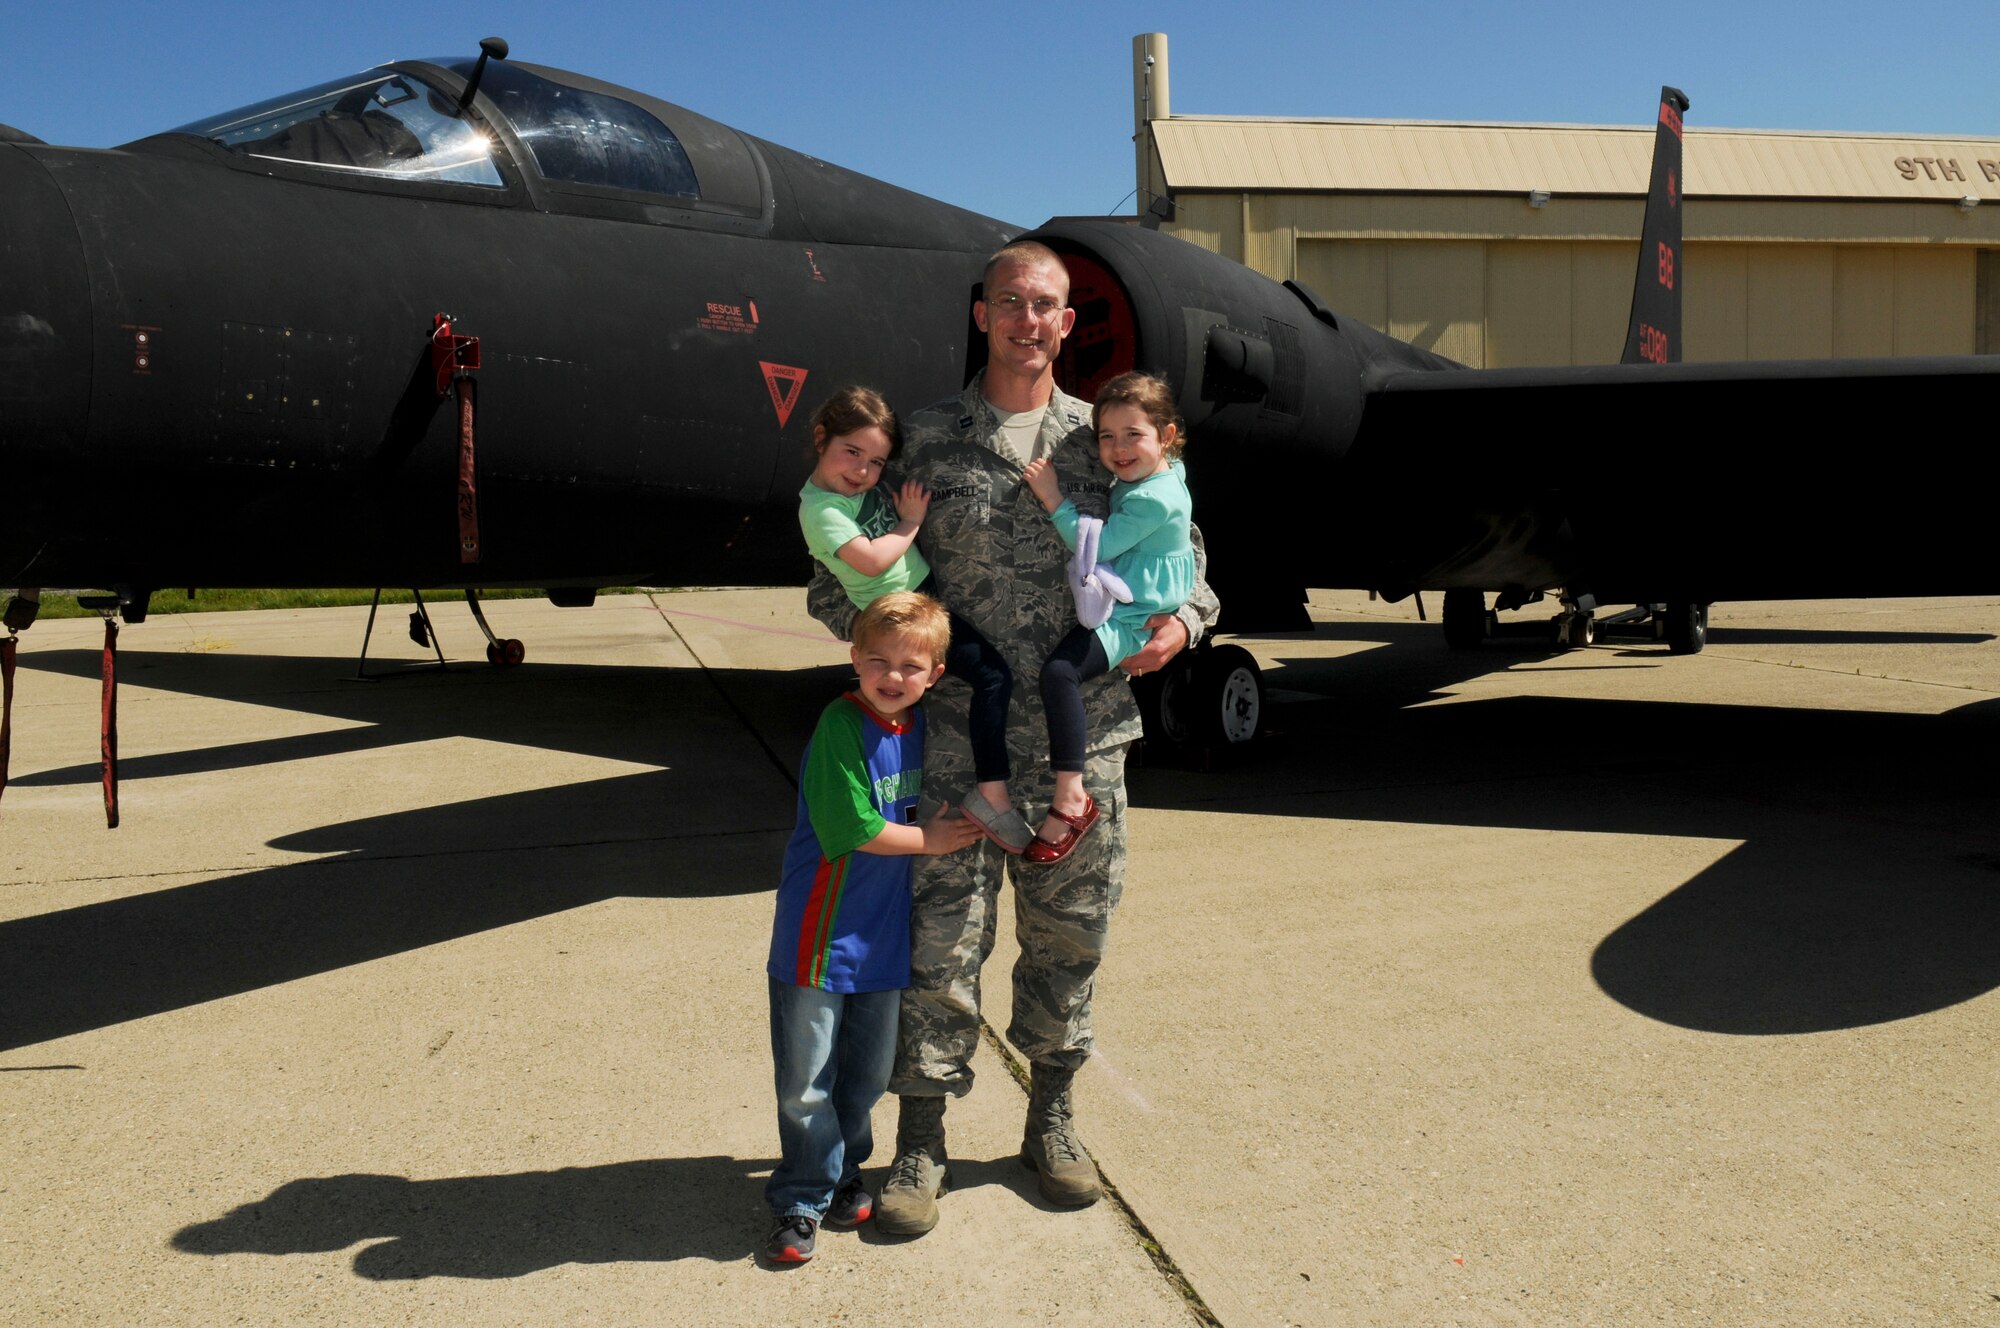 Chaplain (Capt.) R. Brenner Campbell, 9th Reconnaissance Wing chaplain, poses with his children in front of a U-2 Dragon Lady on Beale Air Force Base, California, Mar. 17, 2016. “Airman 2 Airman” fostered an inclusive environment encouraging personnel to be in touch with their spiritual side. (U.S. Air Force photo by Senior Airman Michael Hunsaker)